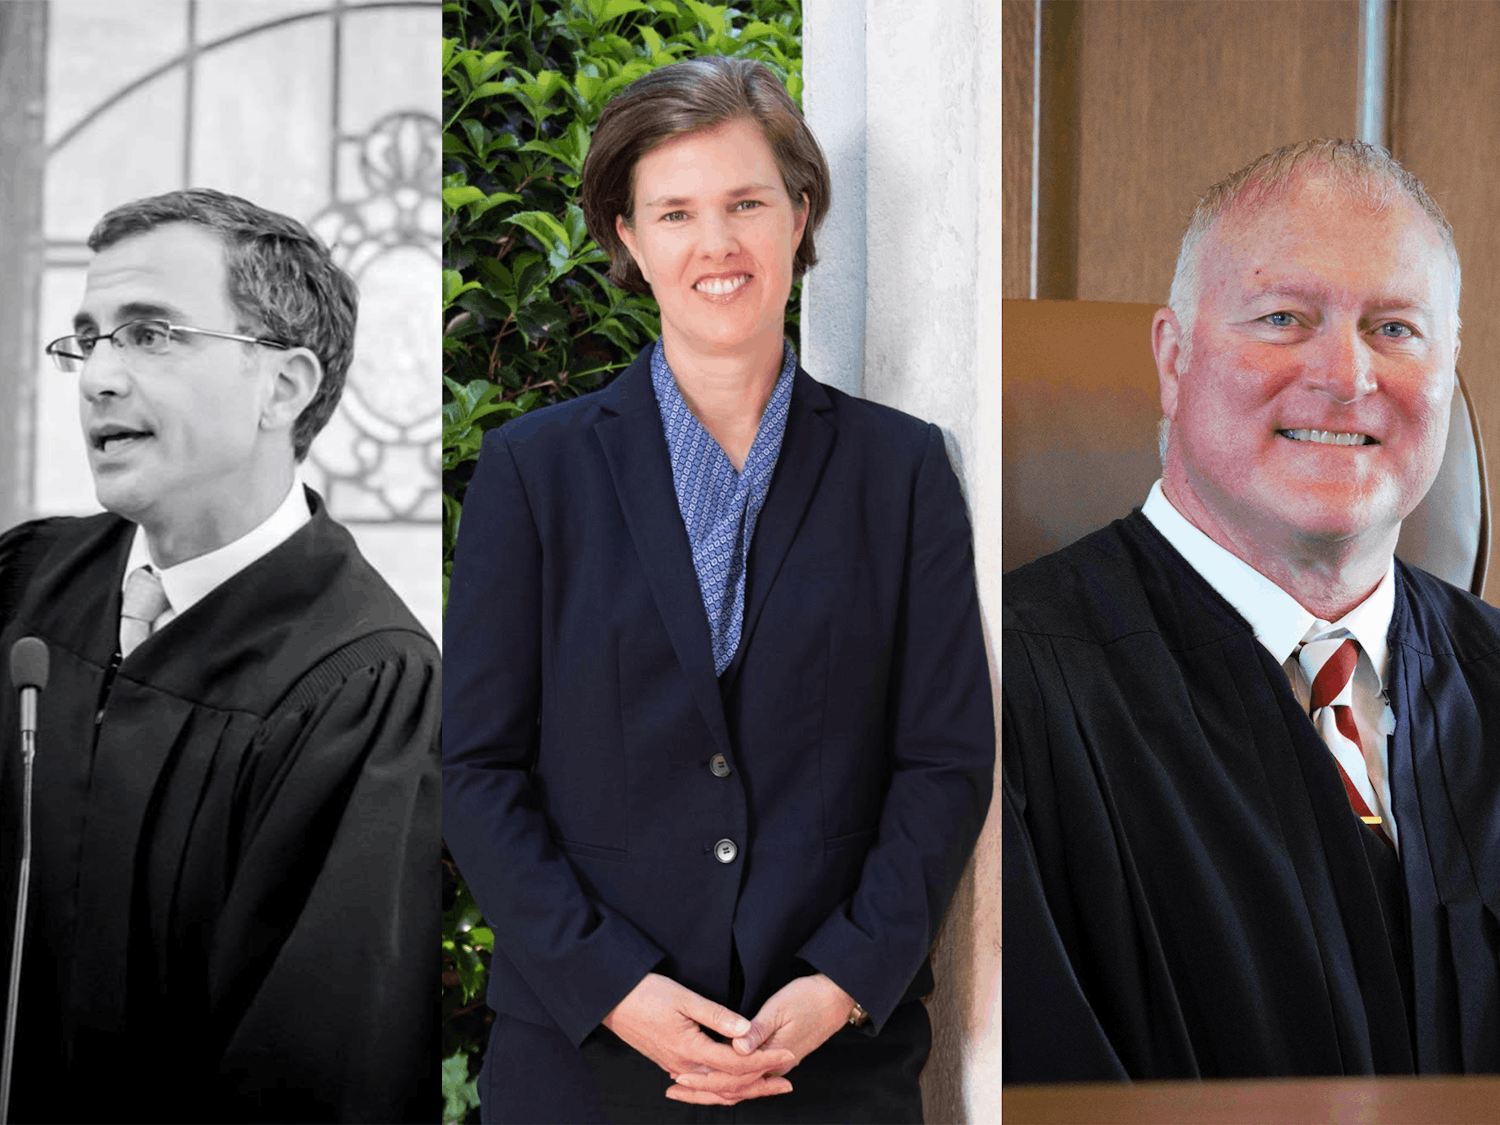 Allen Baddour, Alyson Grine and Todd Roper are all candidates for district court judge positions. Photos courtesy of Baddour, Grine and Roper.